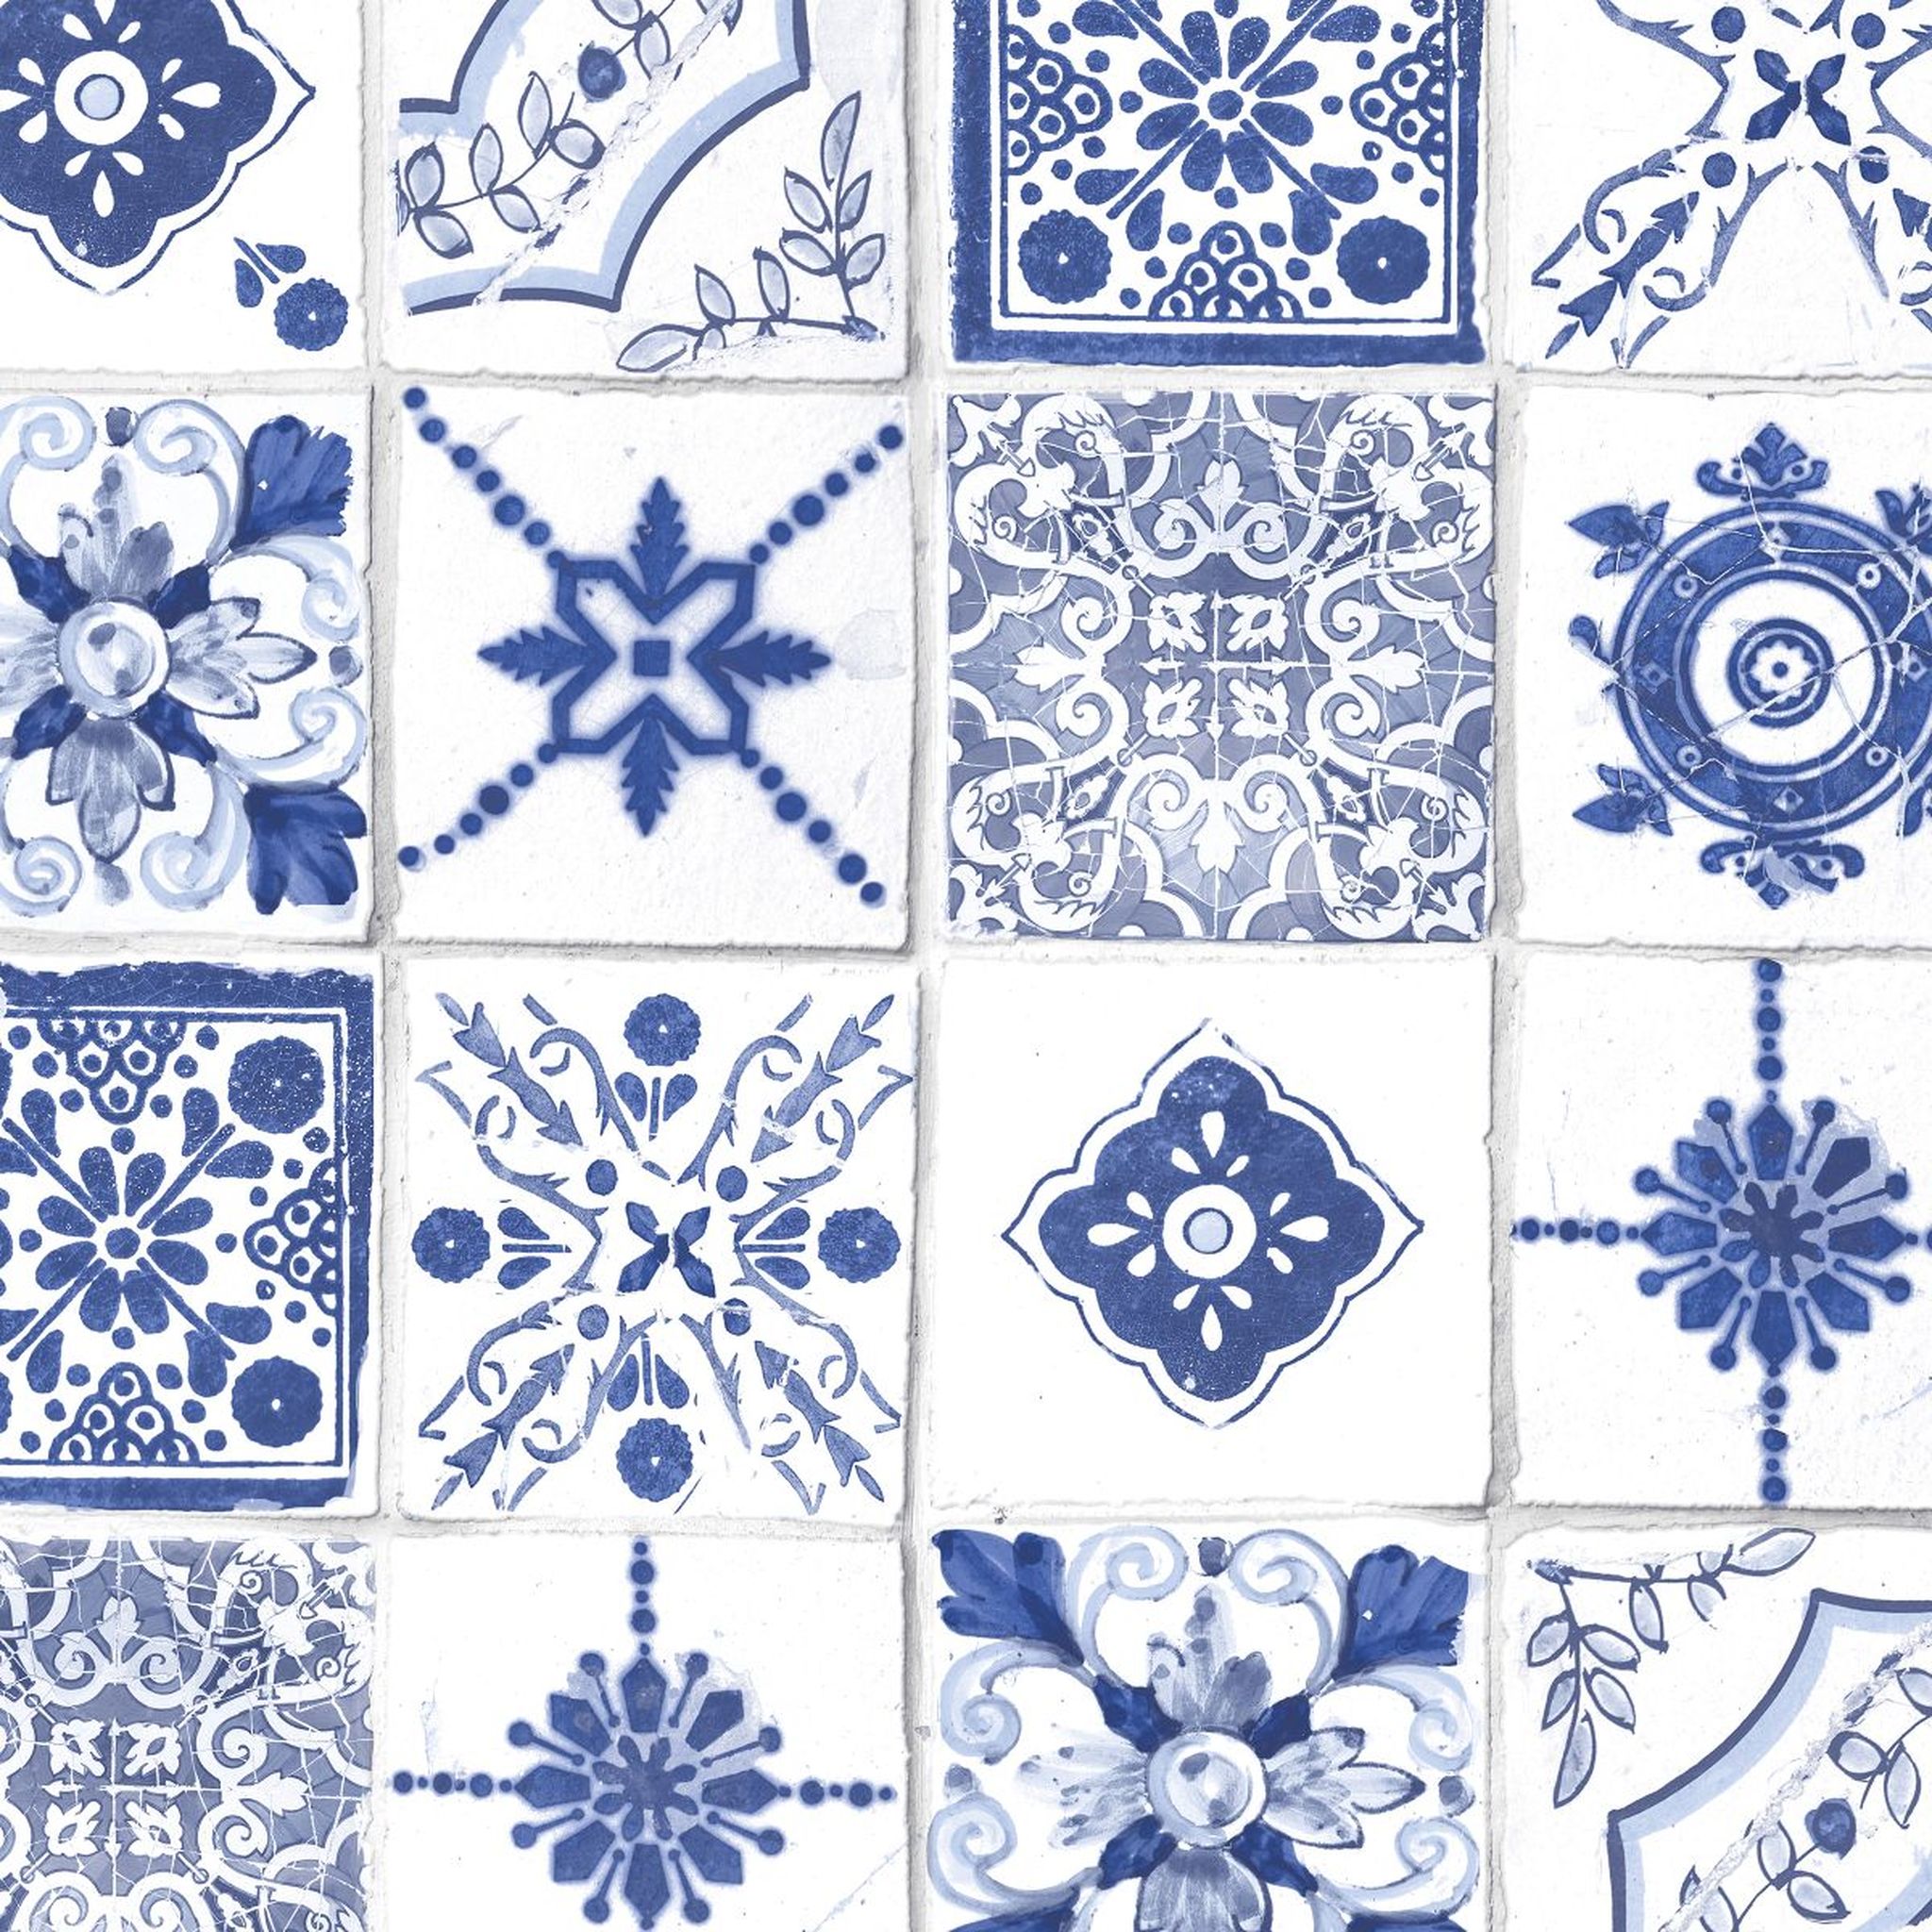 Rustic Moroccan Tiles - Moroccan Tiles Grey And White - HD Wallpaper 